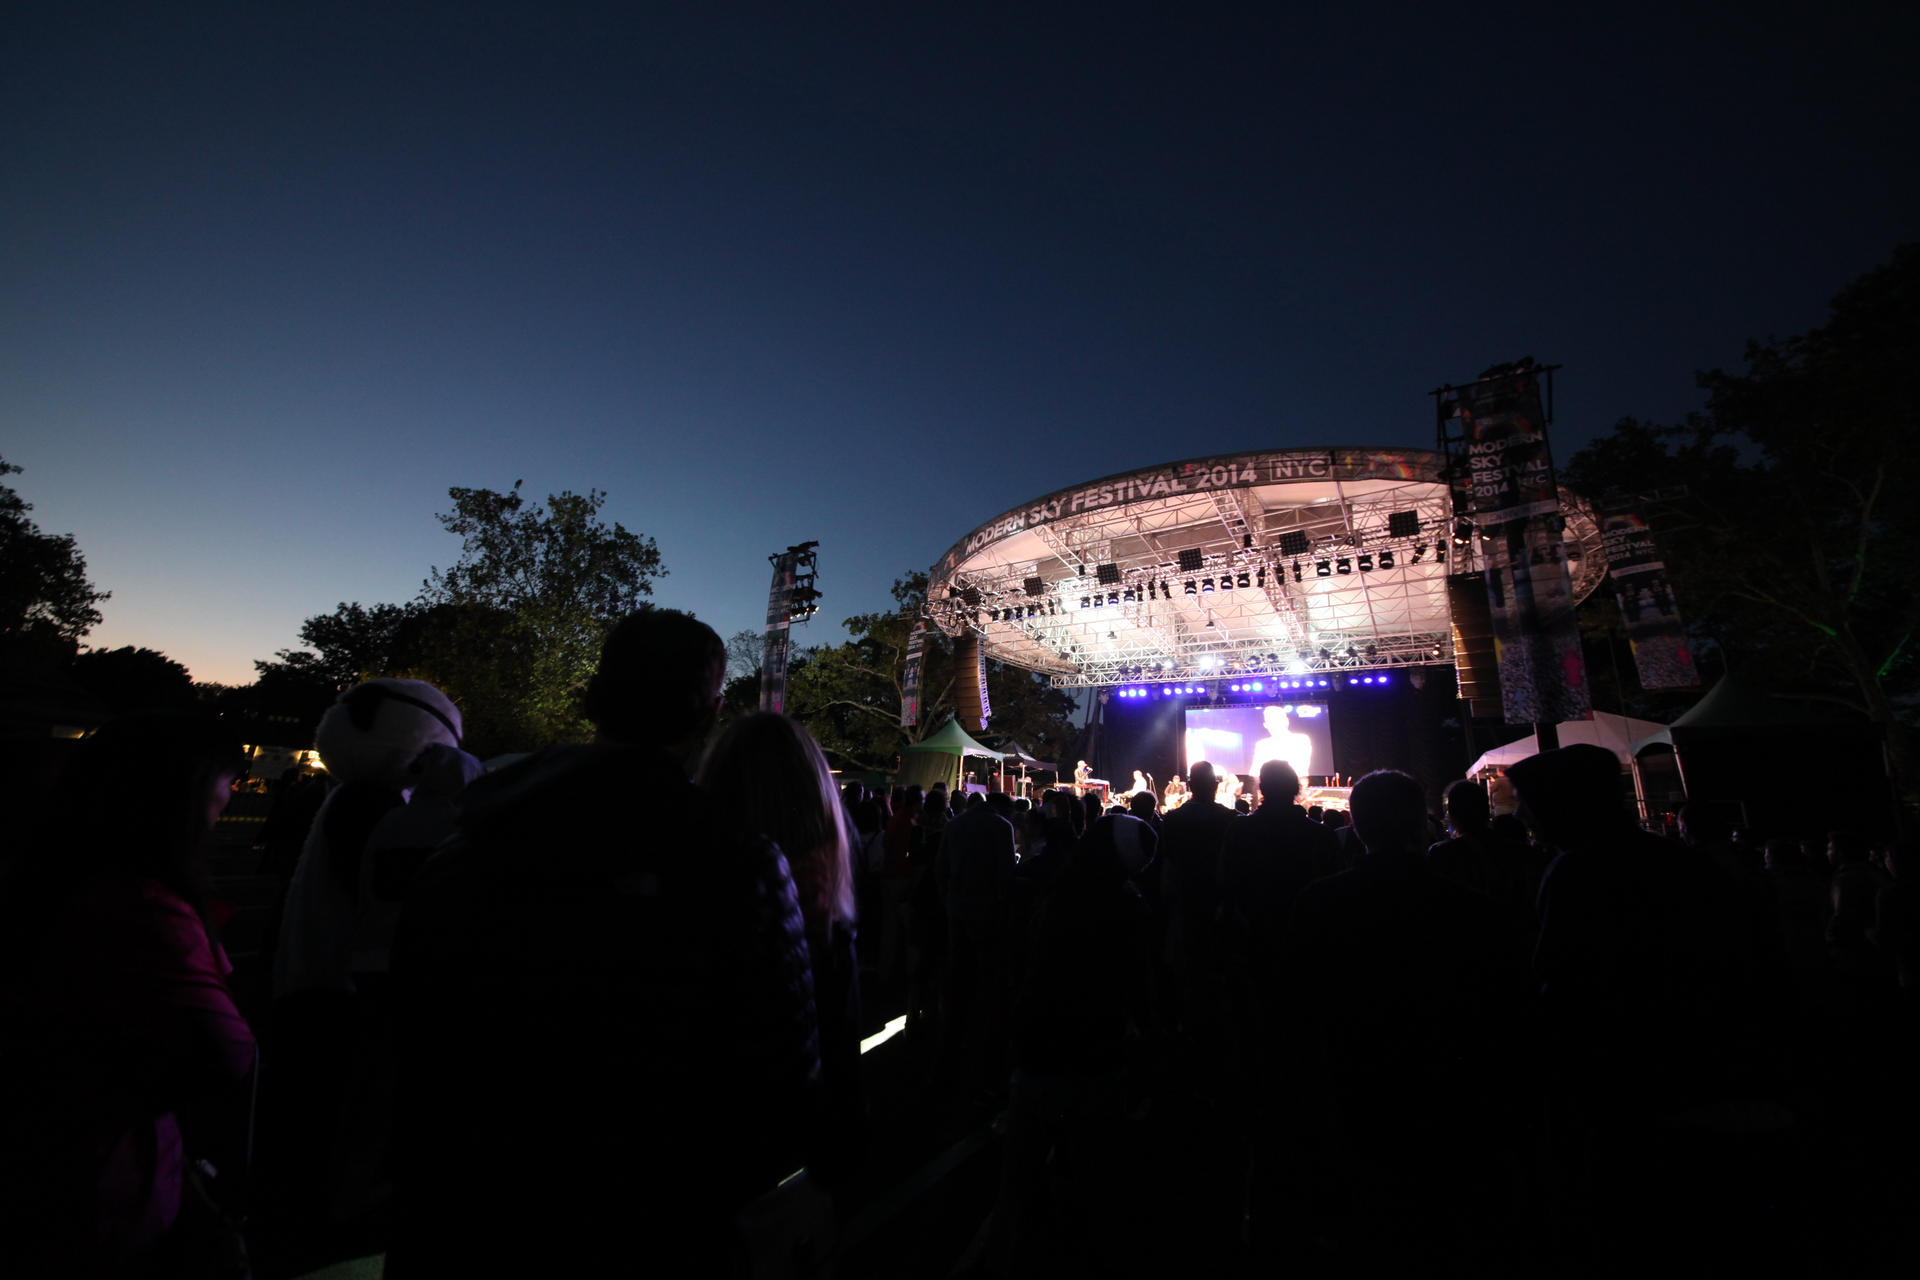 Last week's Modern Sky Festival NYC in Central Park featured a mixed bill of Chinese and Western acts, with an audience demographic to match.